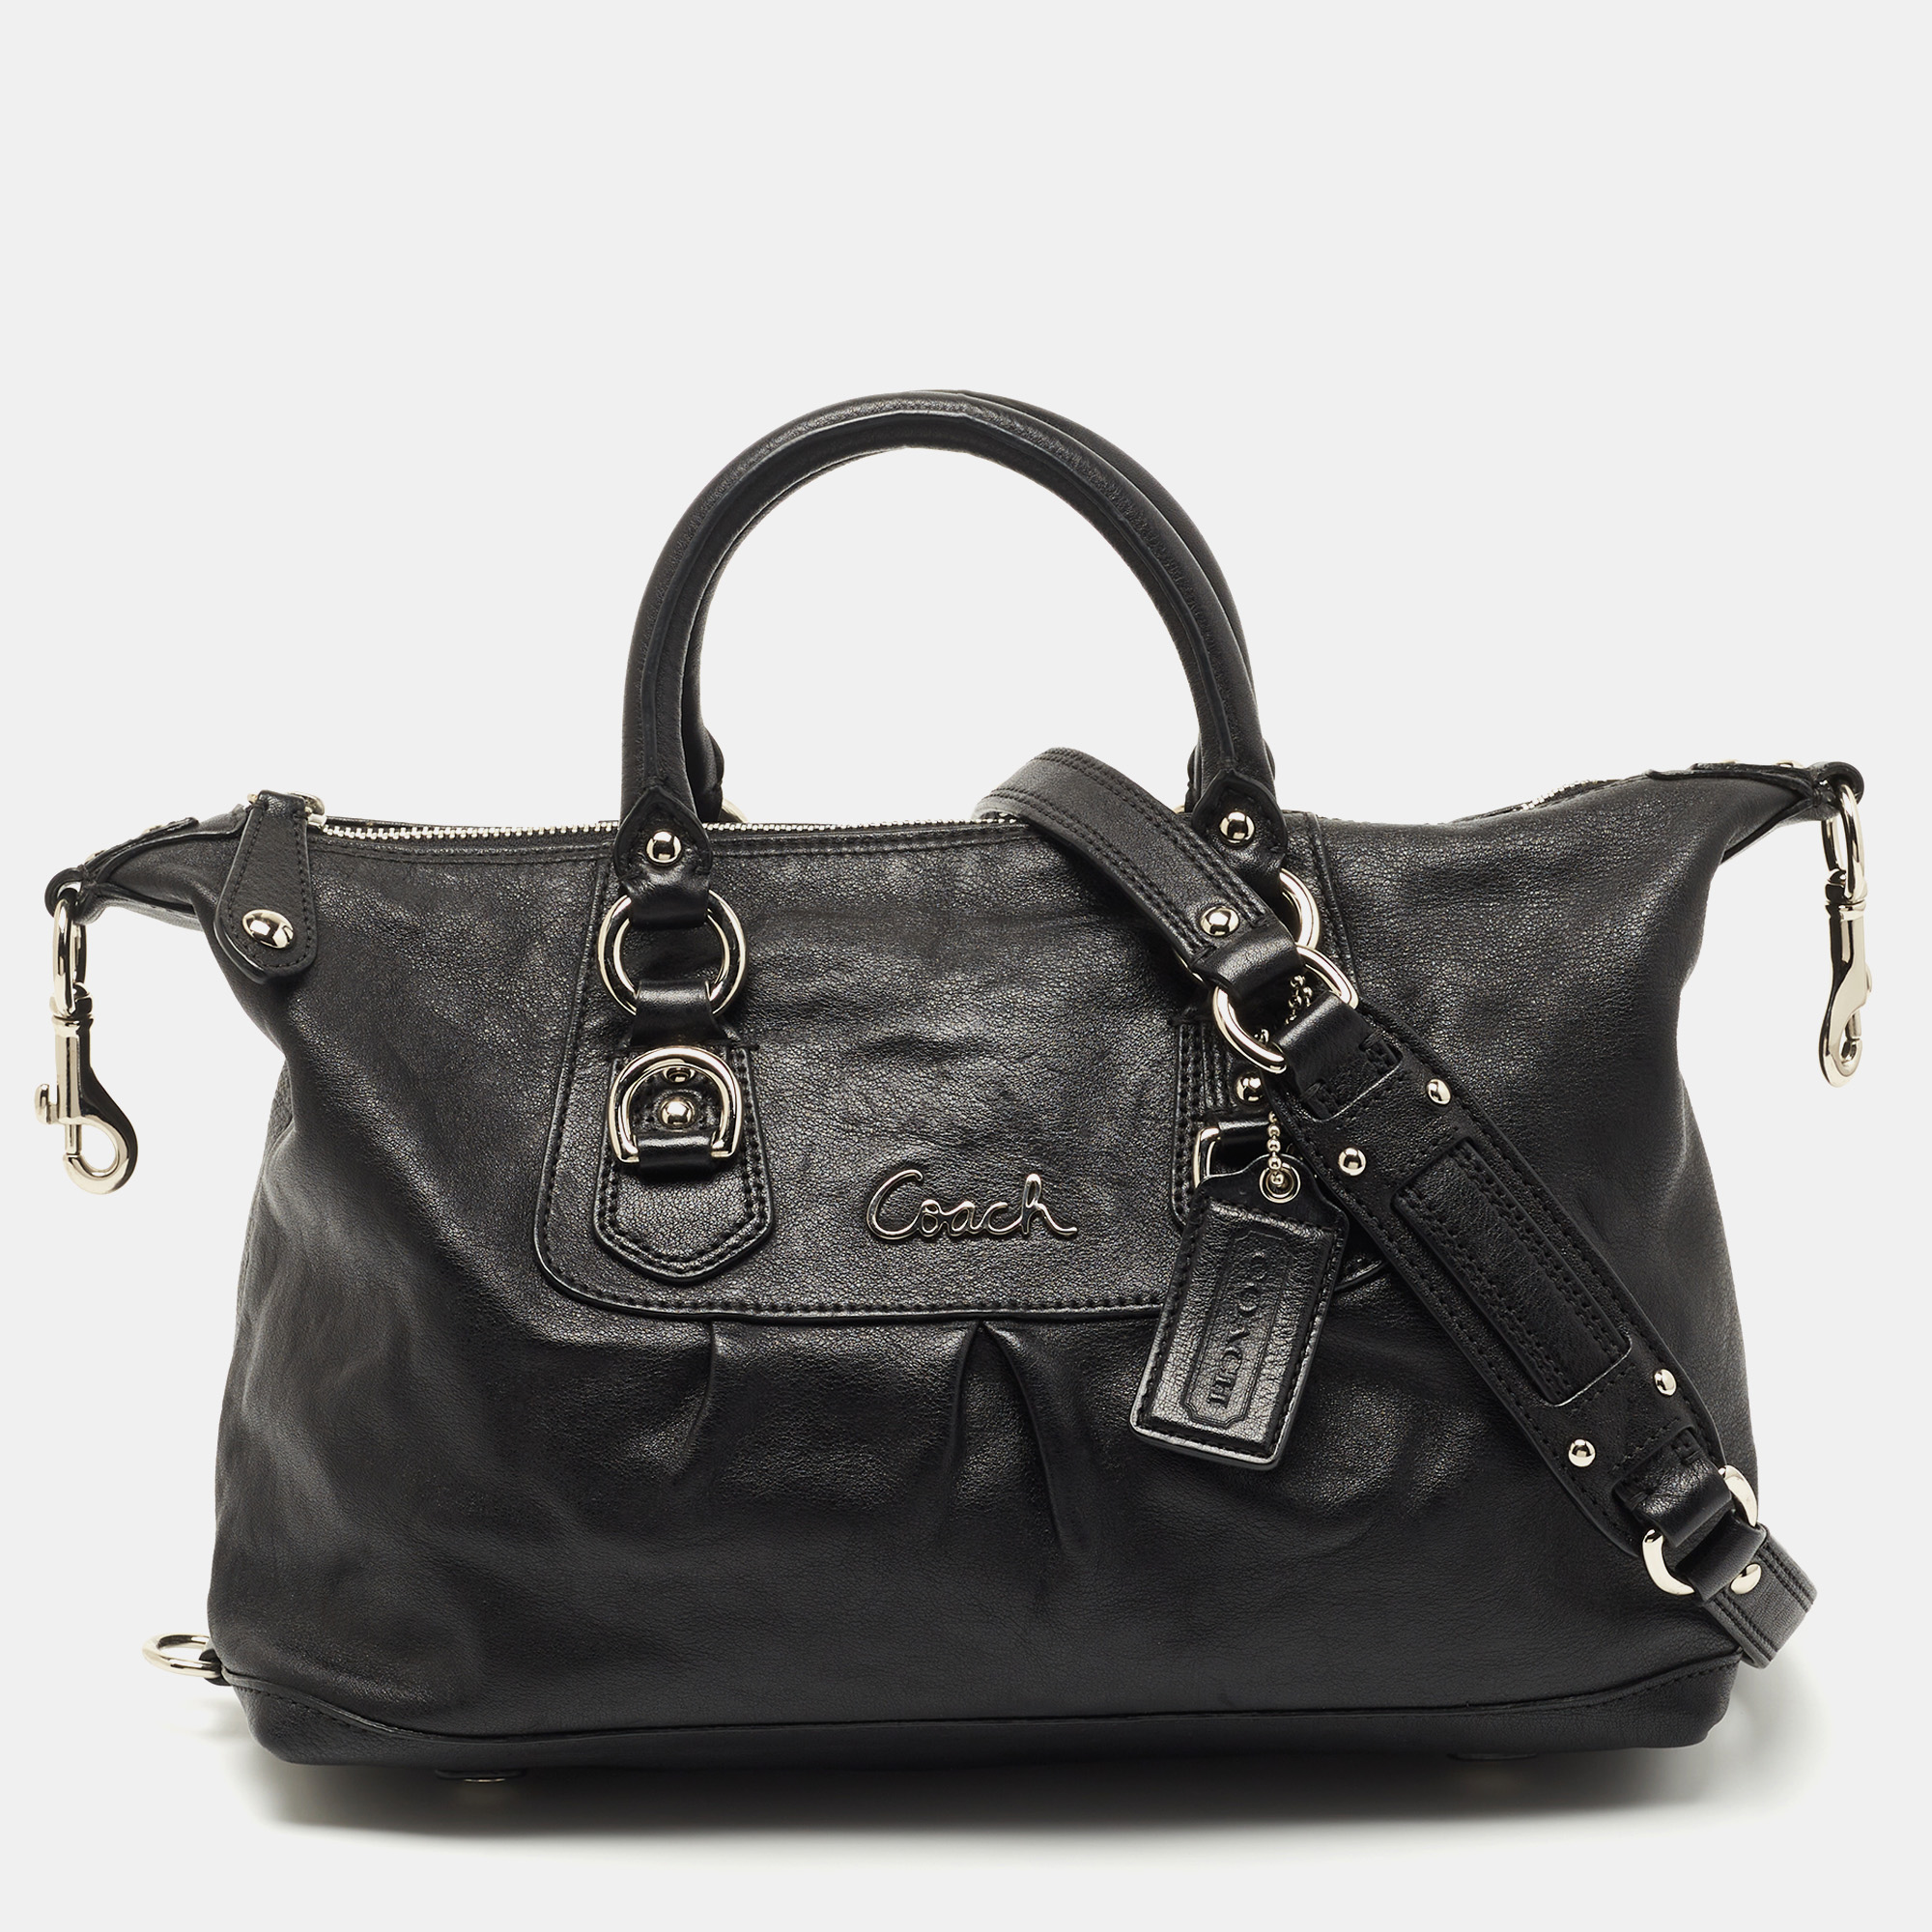 Pre-owned Coach Black Leather Ashley Satchel